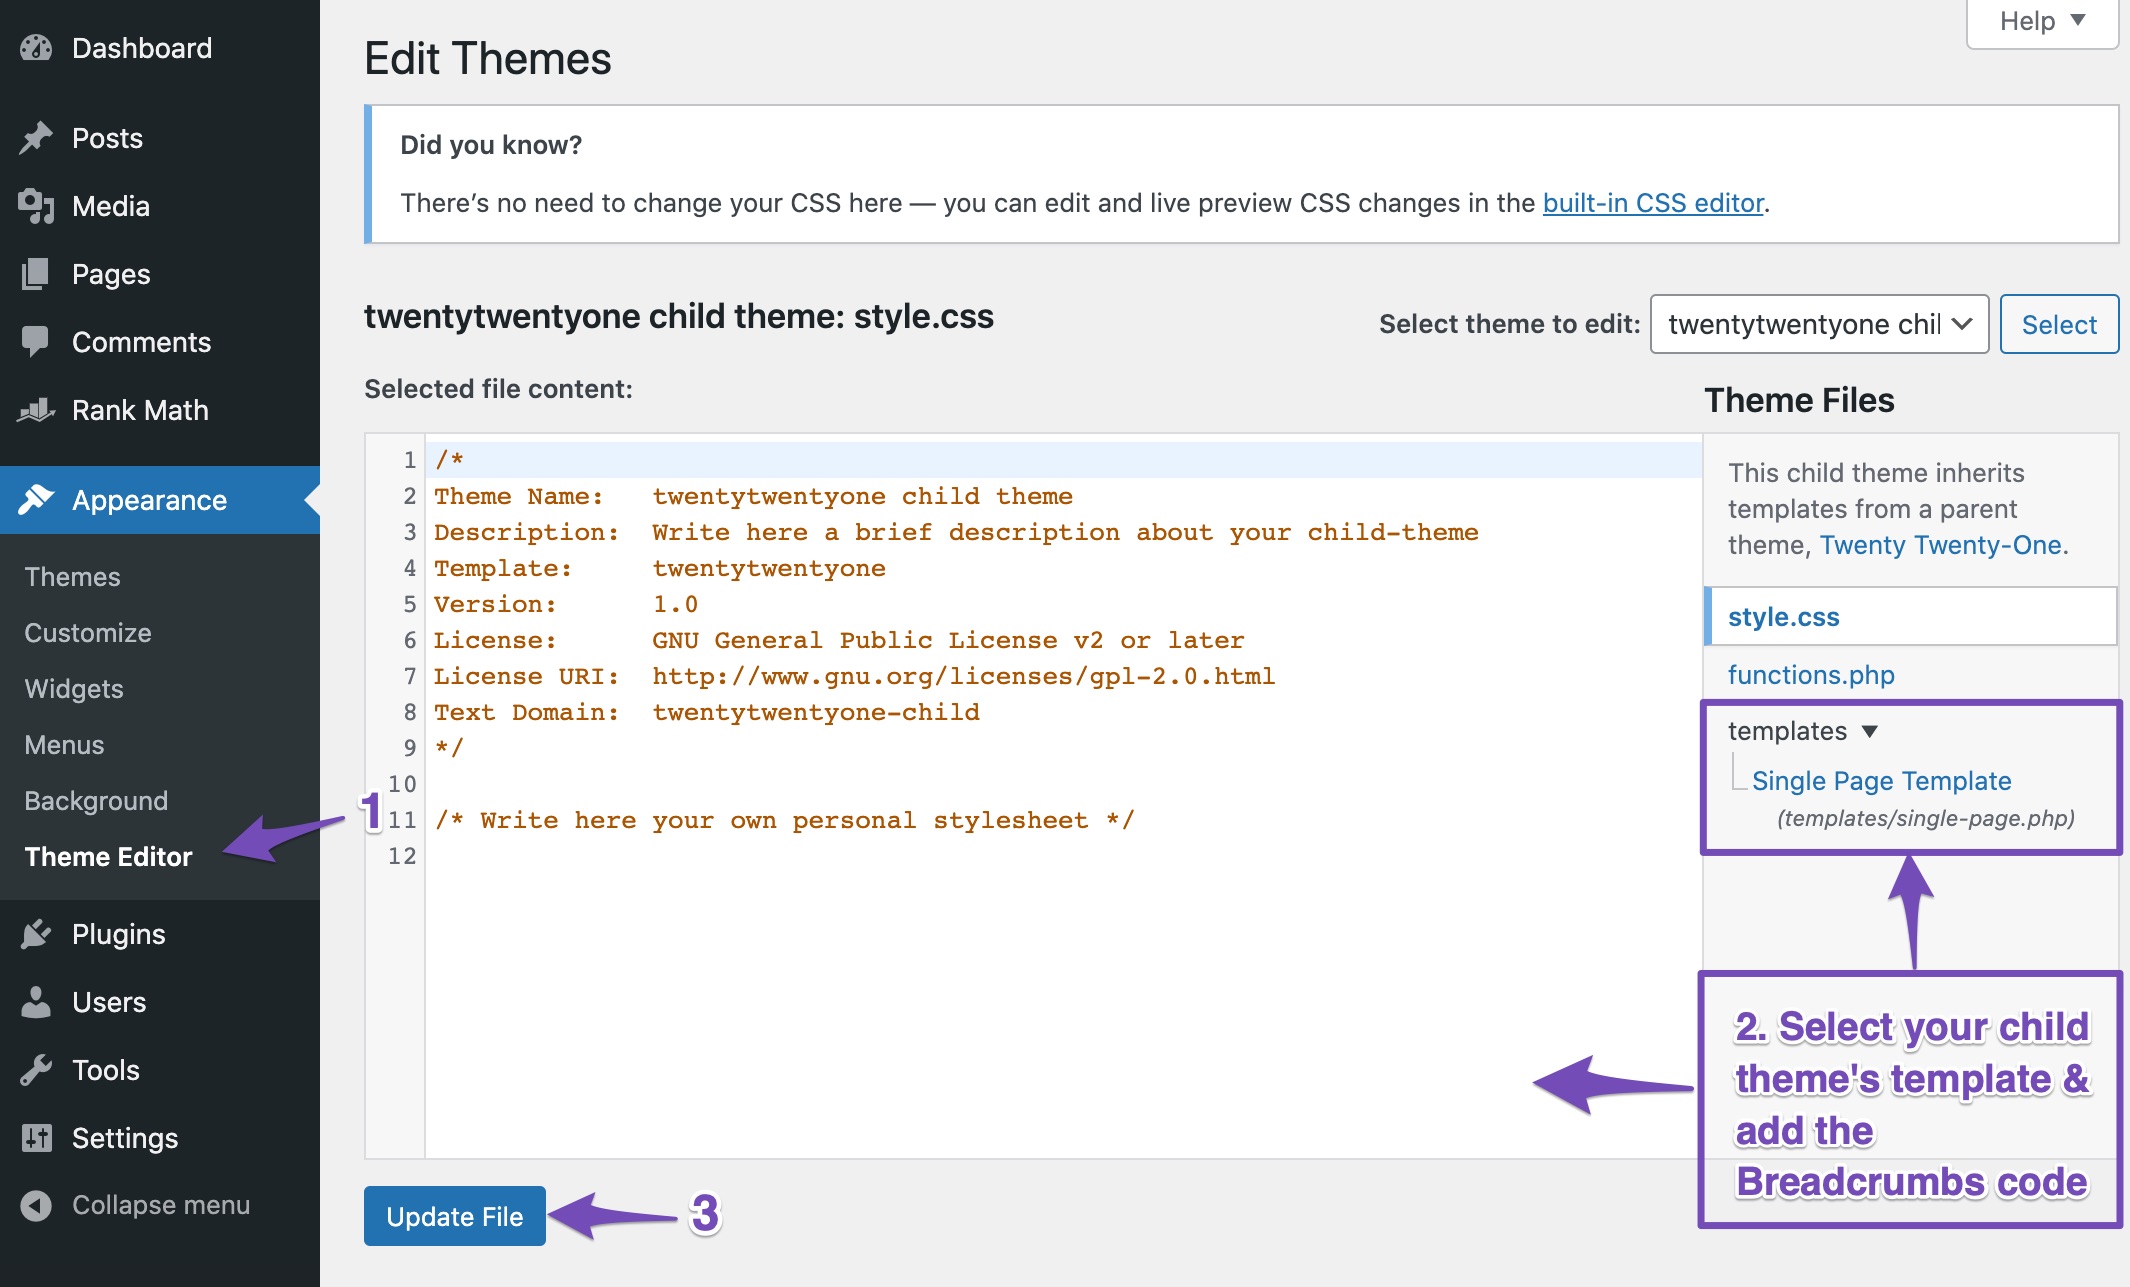 Add Breadcrumbs code to your theme's template file